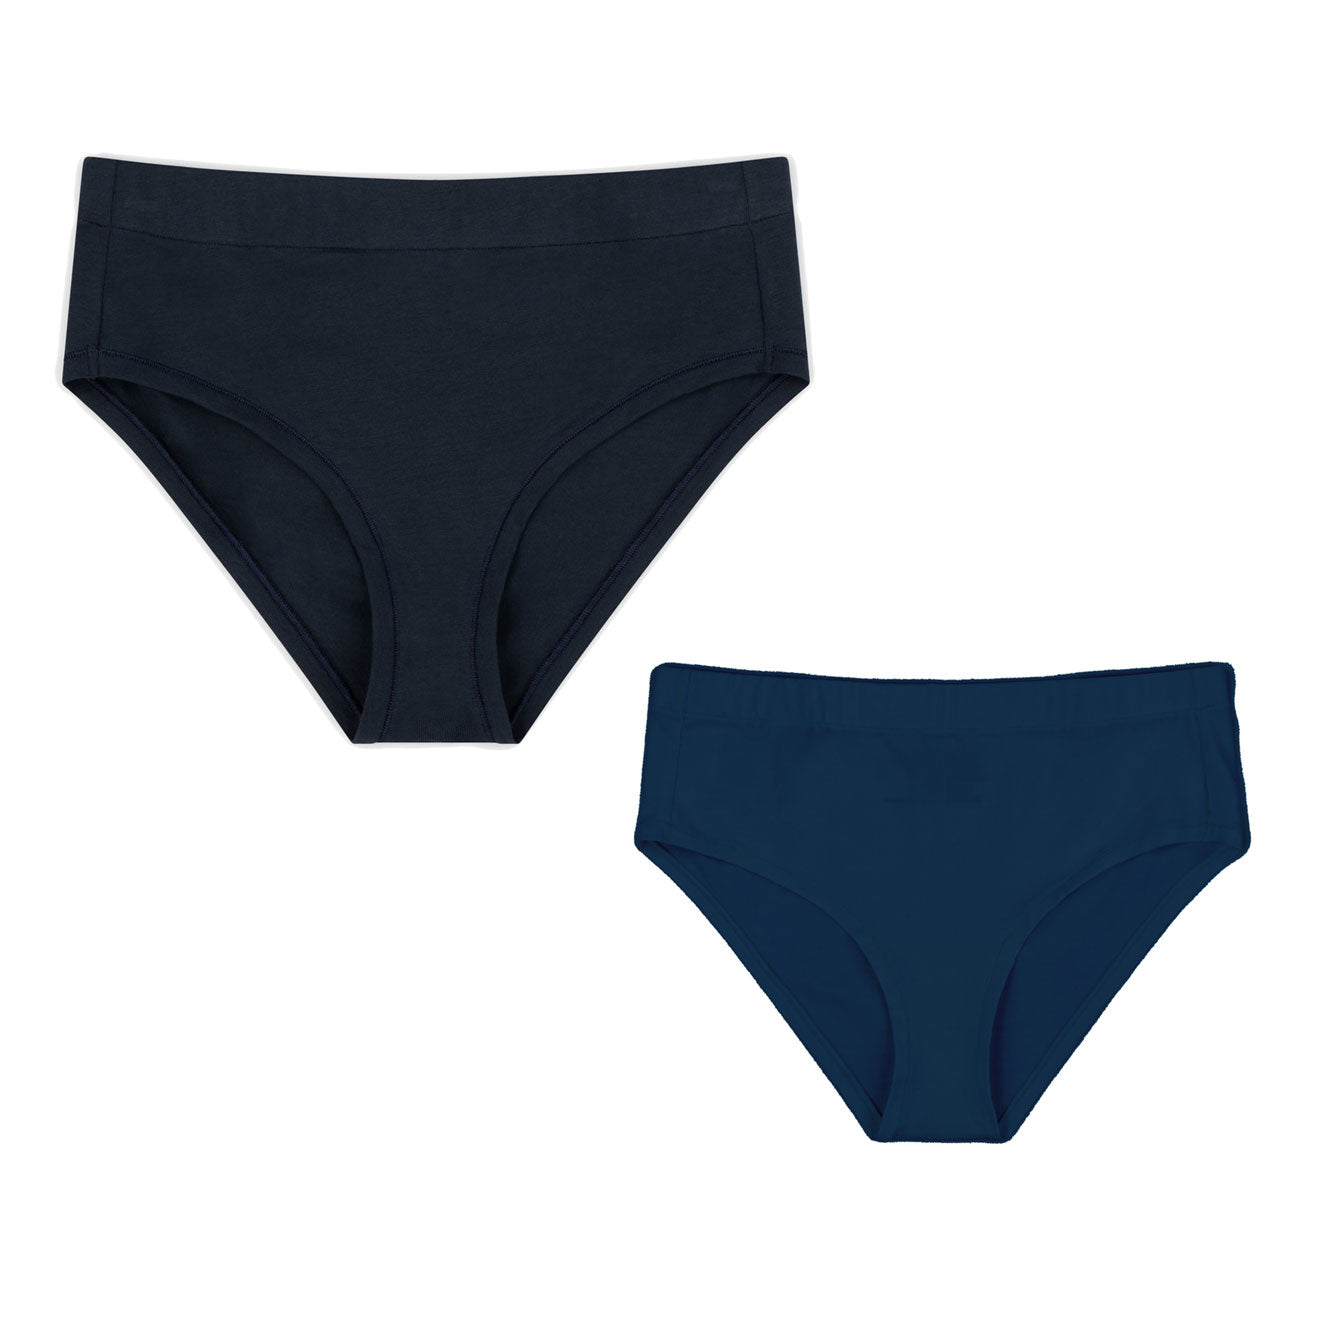 high rise brief in black and navy, organic everyday basic underwear